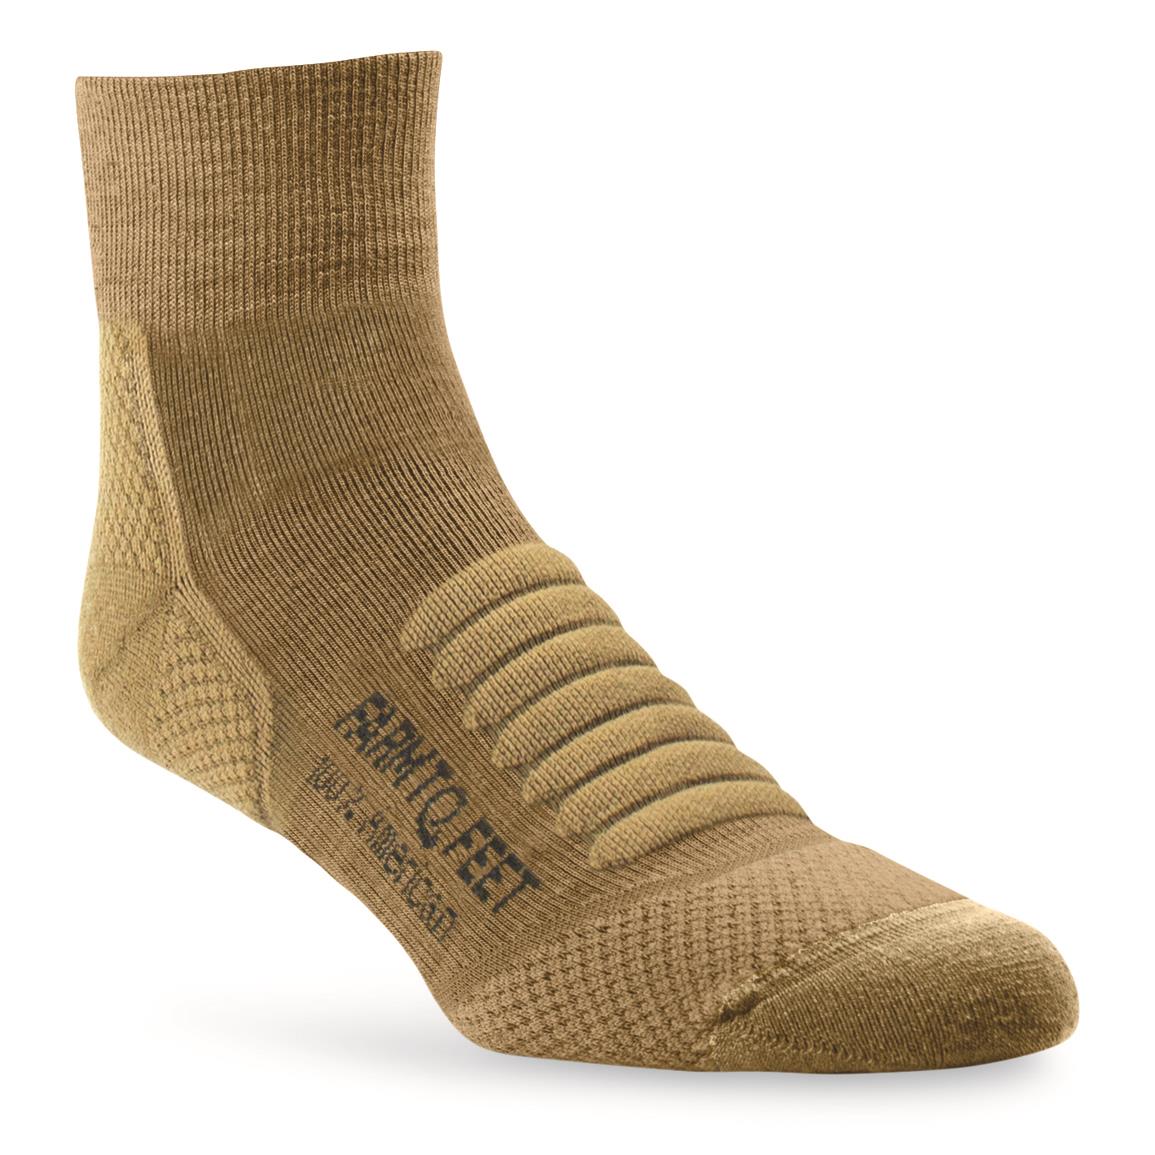 Farm to Feet Tactical Fayetteville Light Targeted Cushion Crew Socks, Coyote Brown